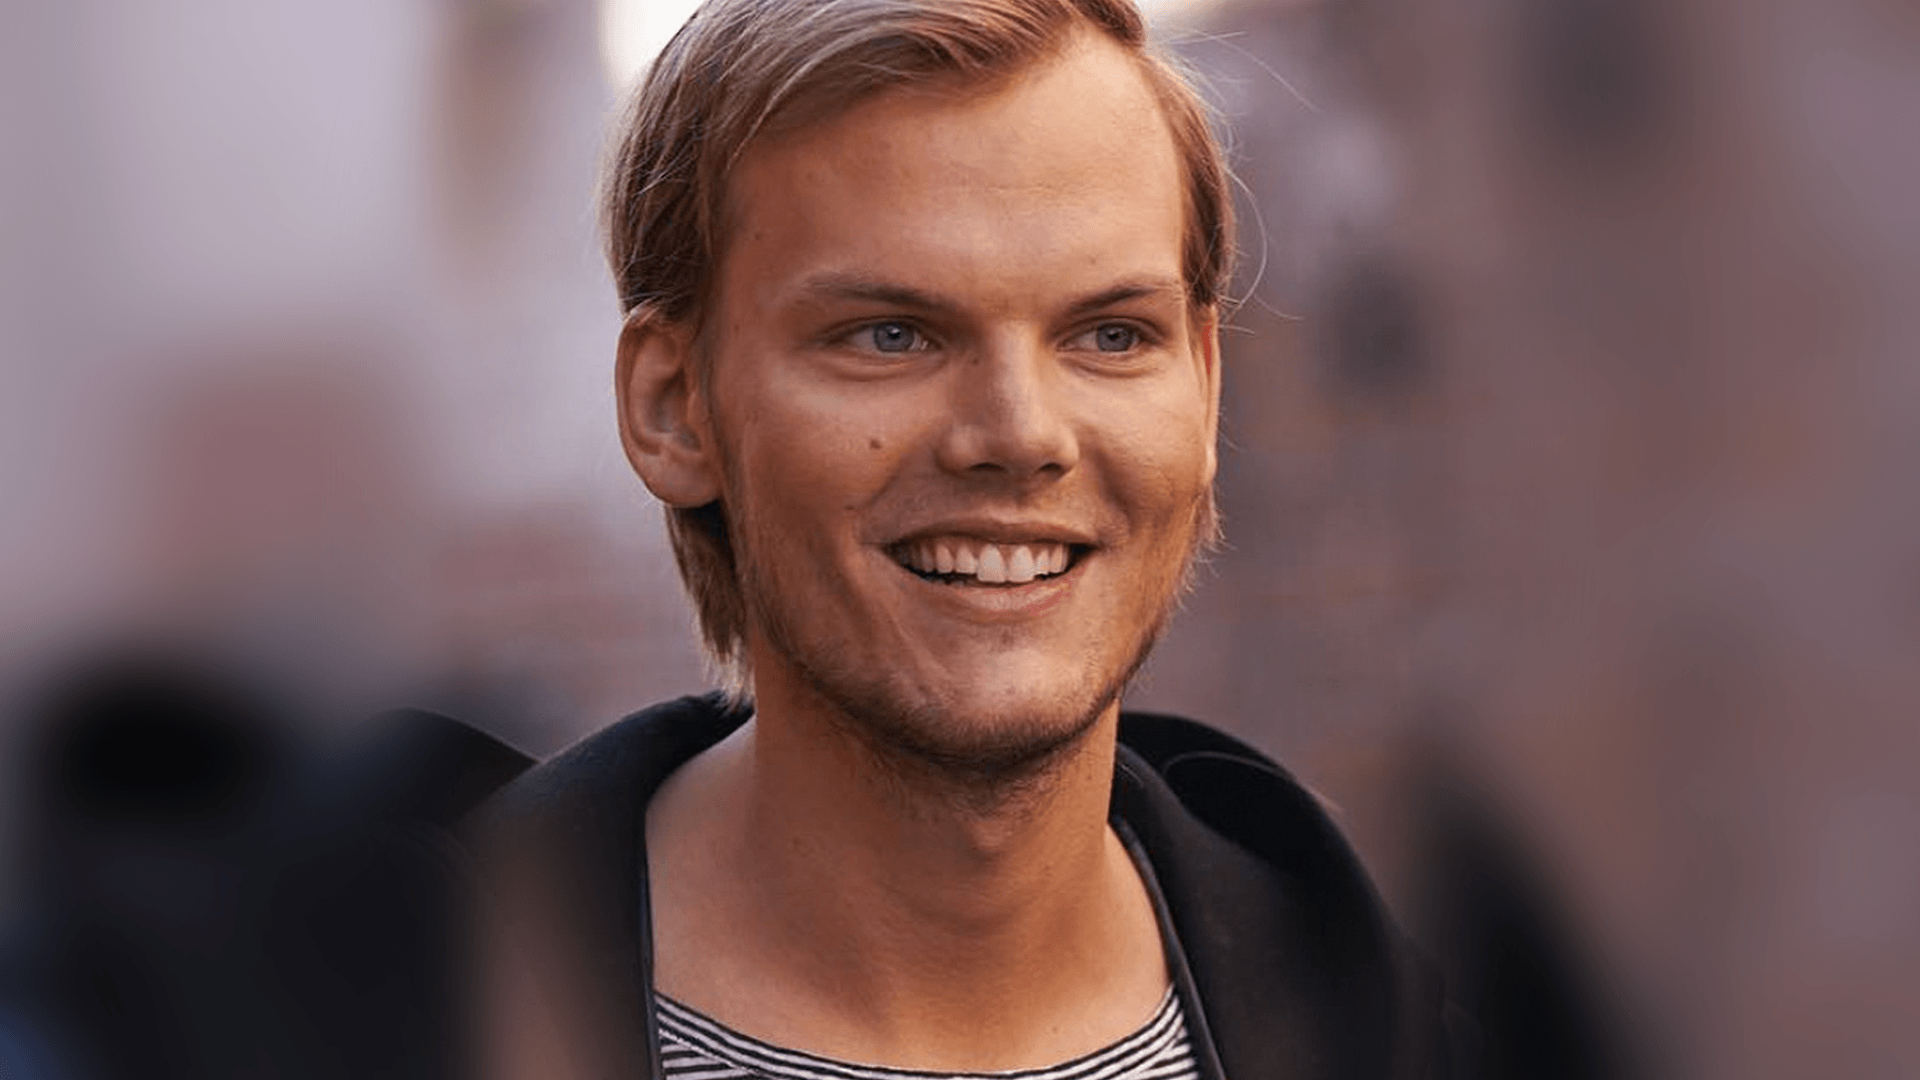 BREAKING: Avicii reveals information about upcoming EP